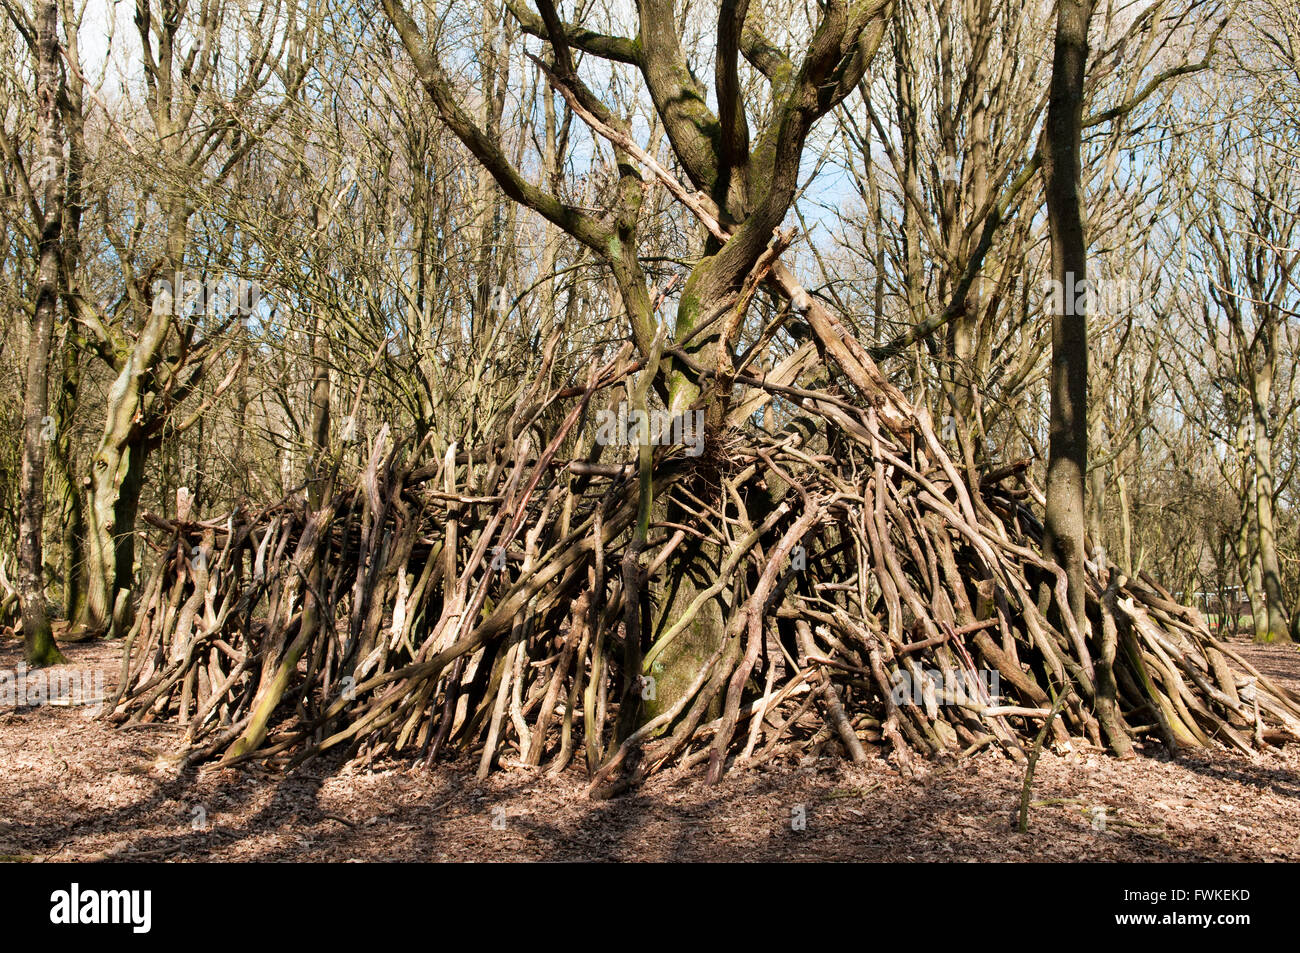 Large stick den built around a tree in the forest Stock Photo